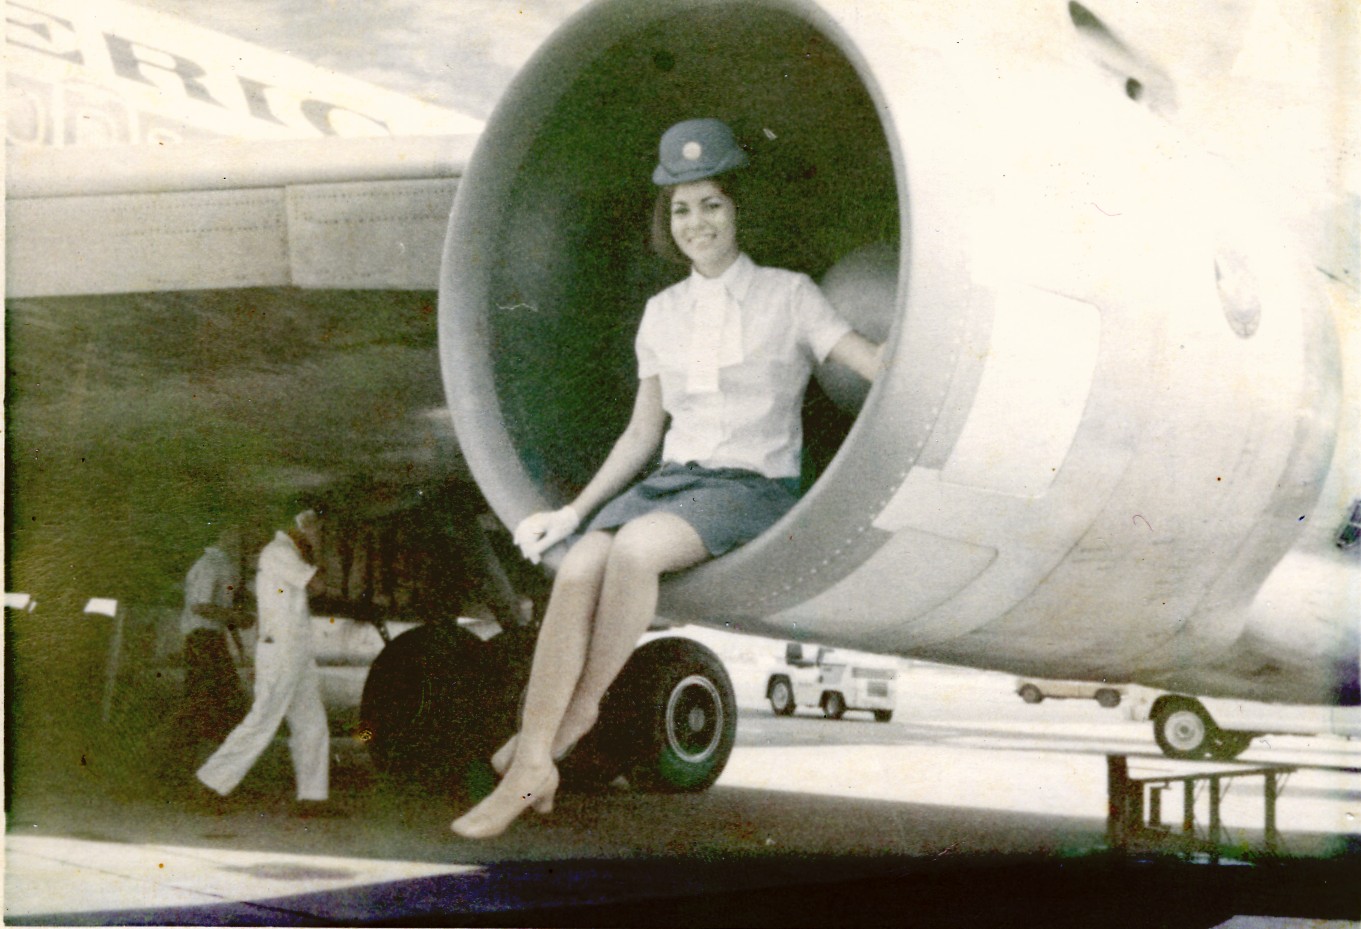 1970s Saigon, Venice poses in the engine of a Pan Am Boeing 707 during a Saigon transit.